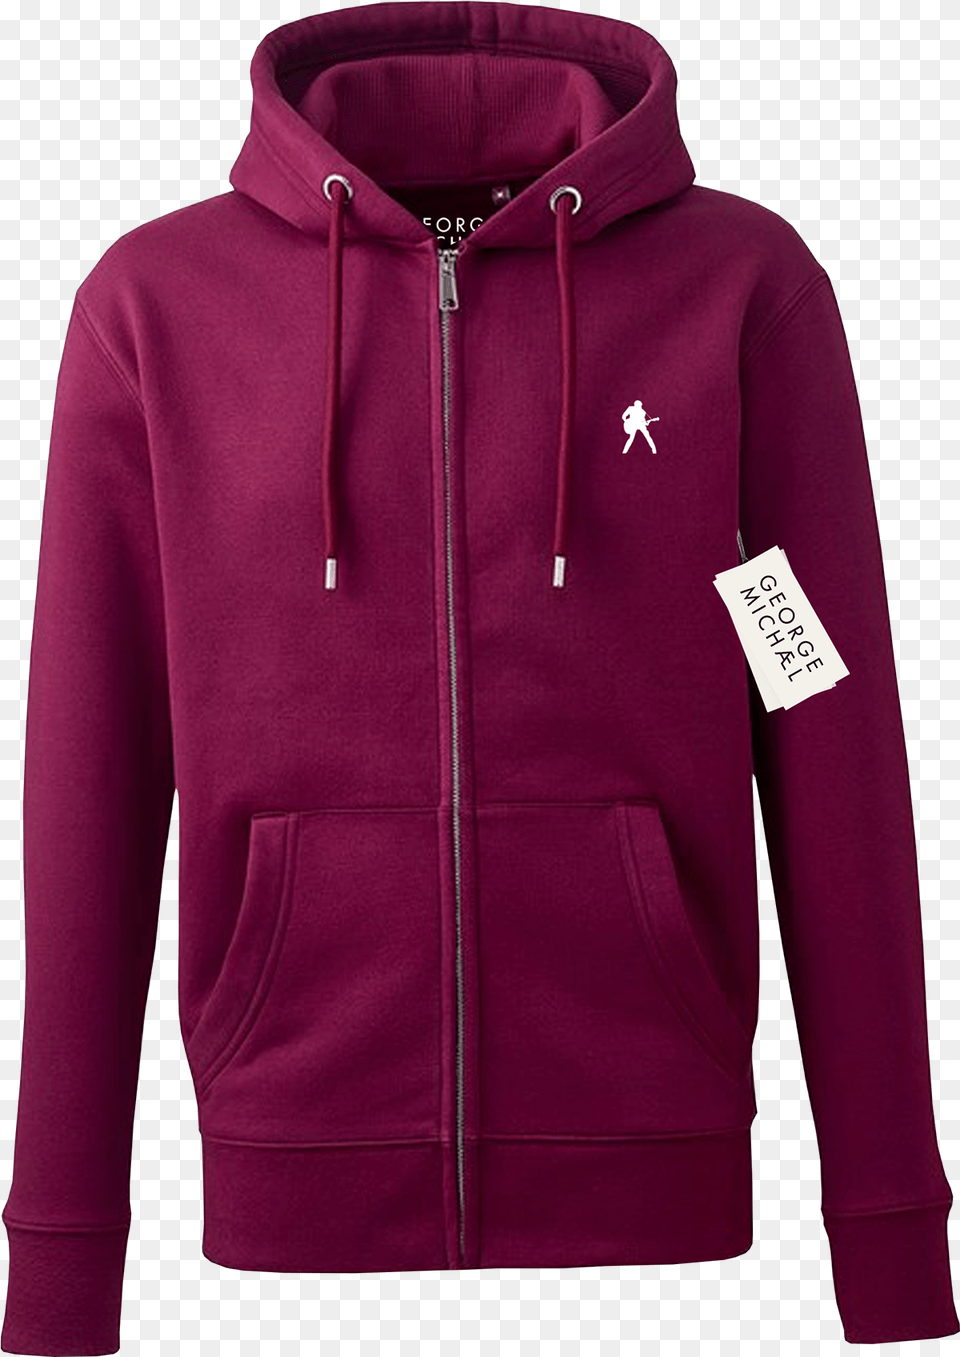 Icon Hoodie Hooded, Clothing, Fleece, Knitwear, Sweater Free Png Download